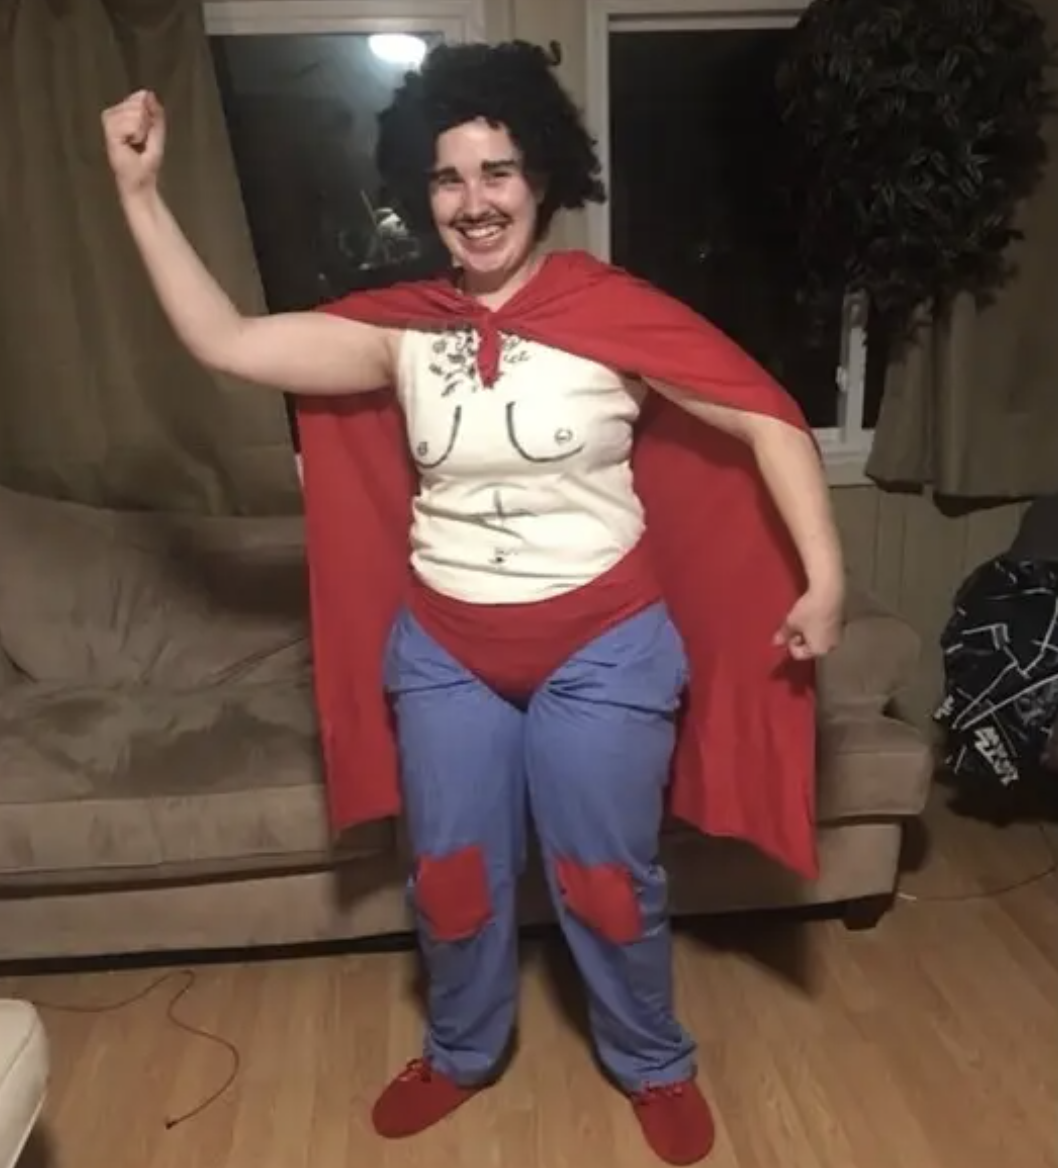 Someone using pajamas, old clothes, and a marker to create their &quot;Nacho Libre&quot; wrestling costume